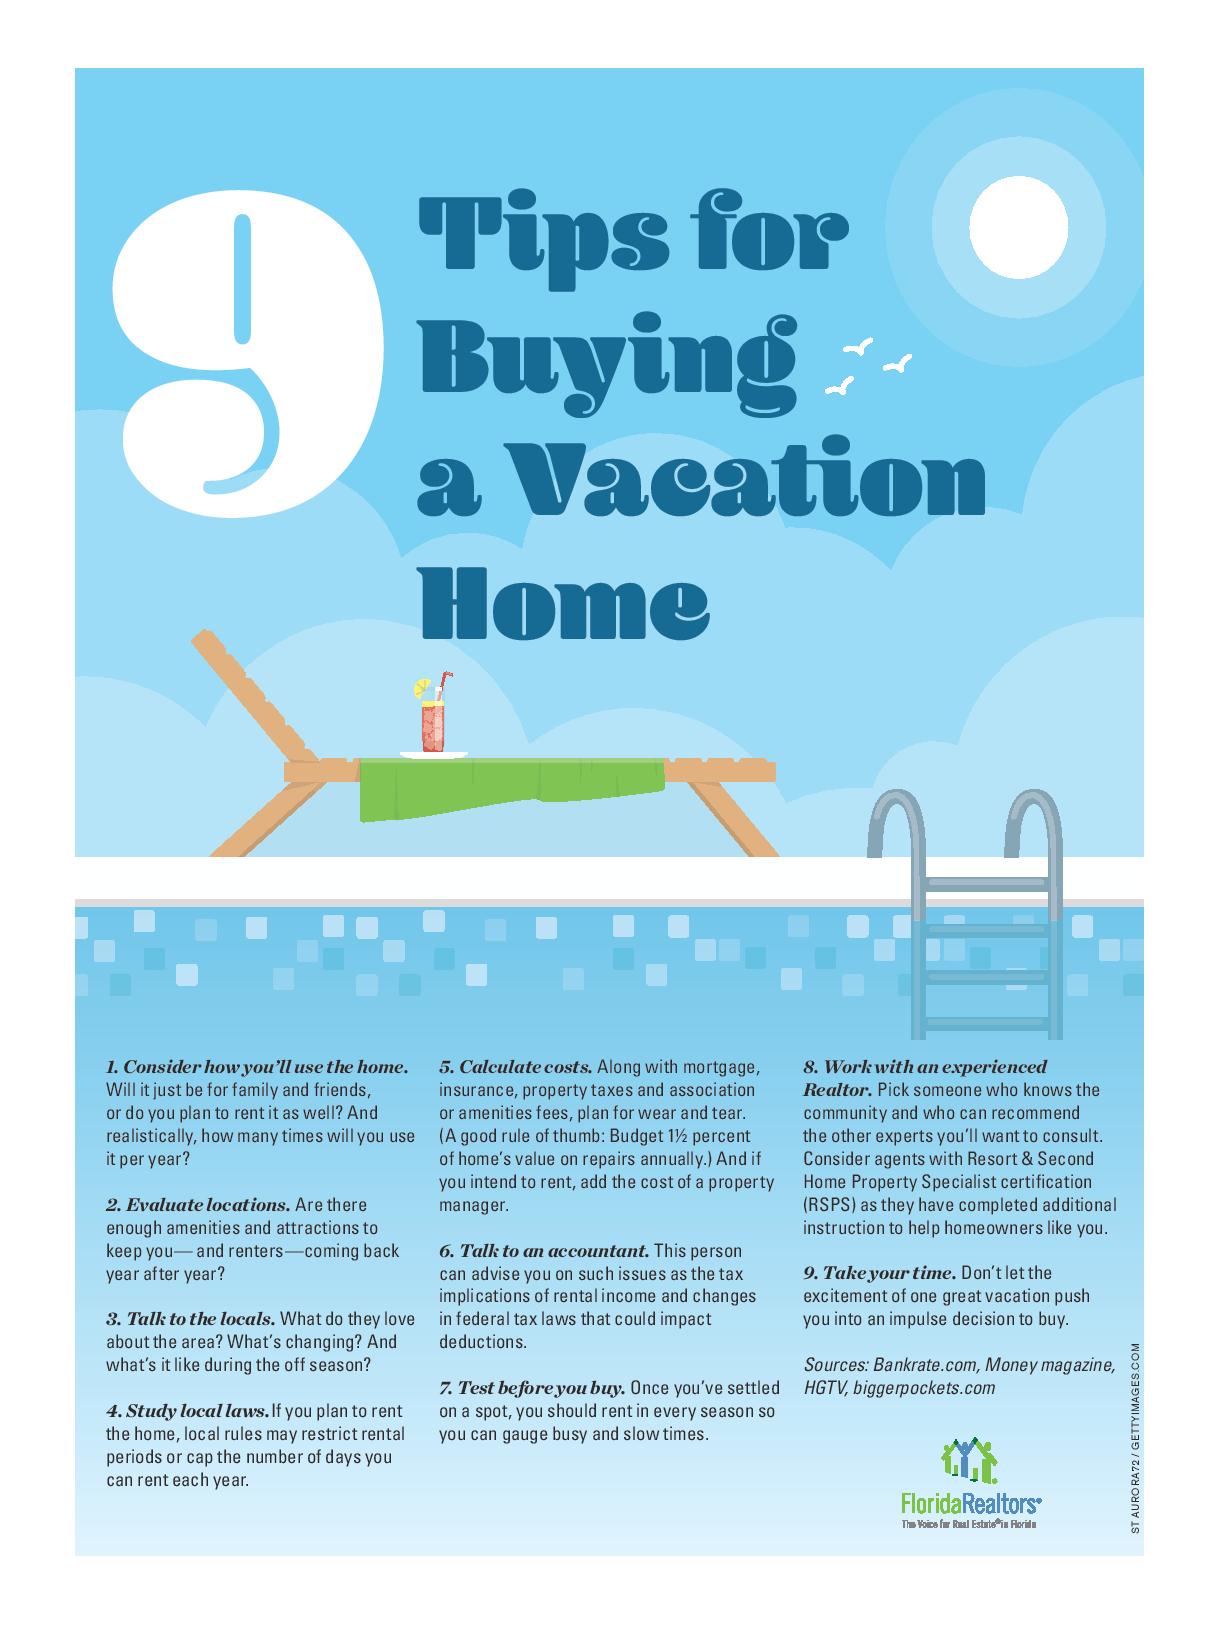  Buying a Vacation Home